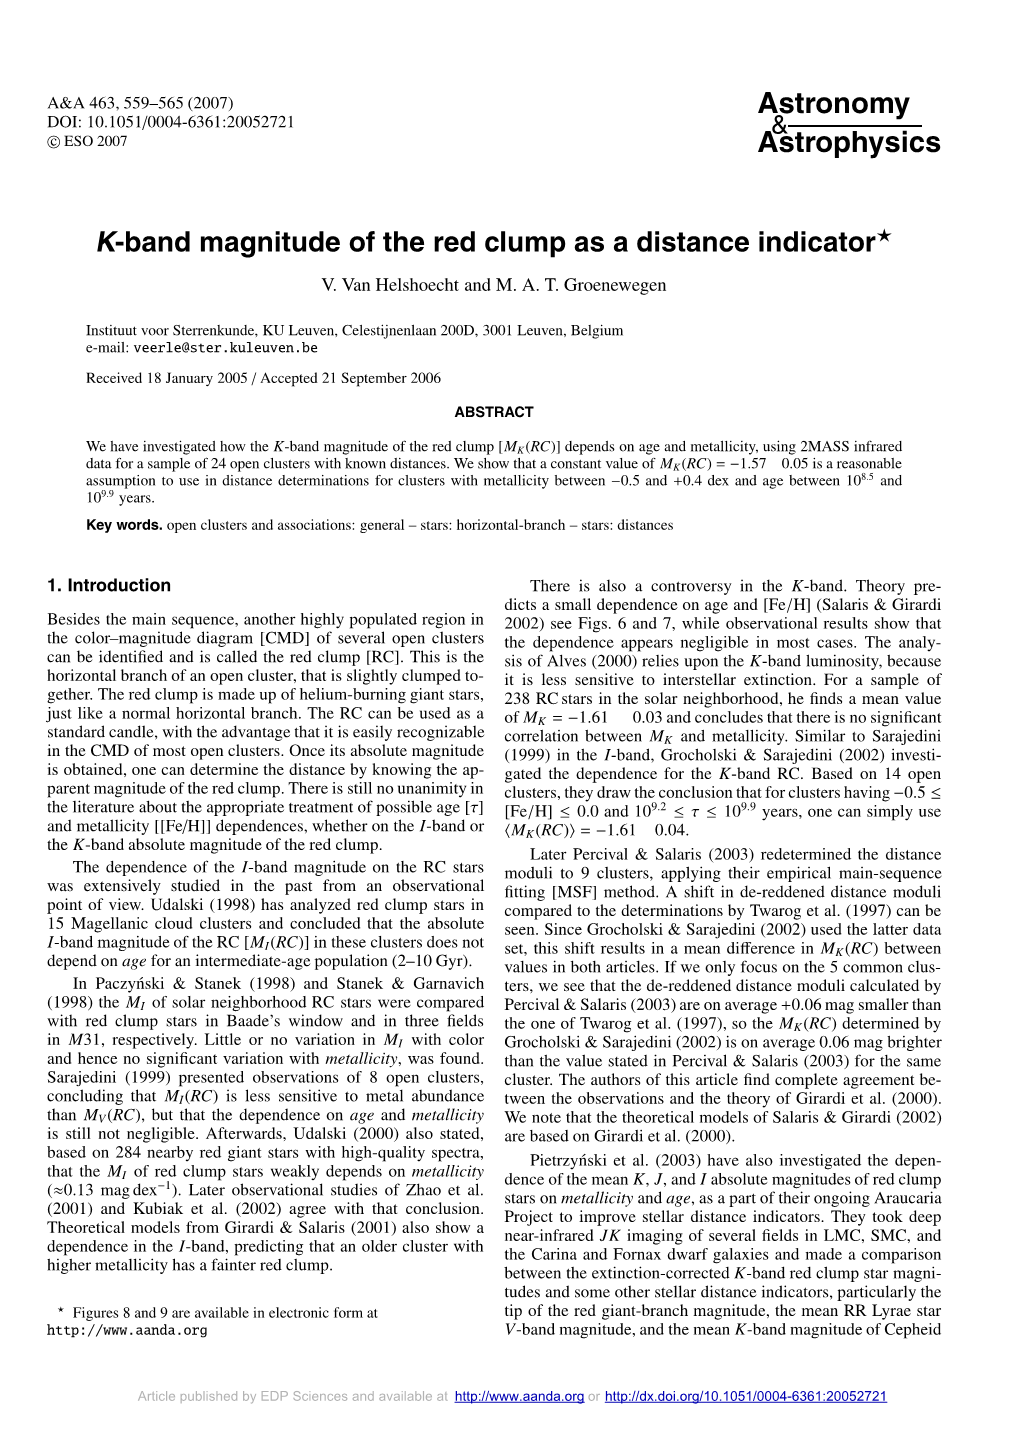 K-Band Magnitude of the Red Clump As a Distance Indicator